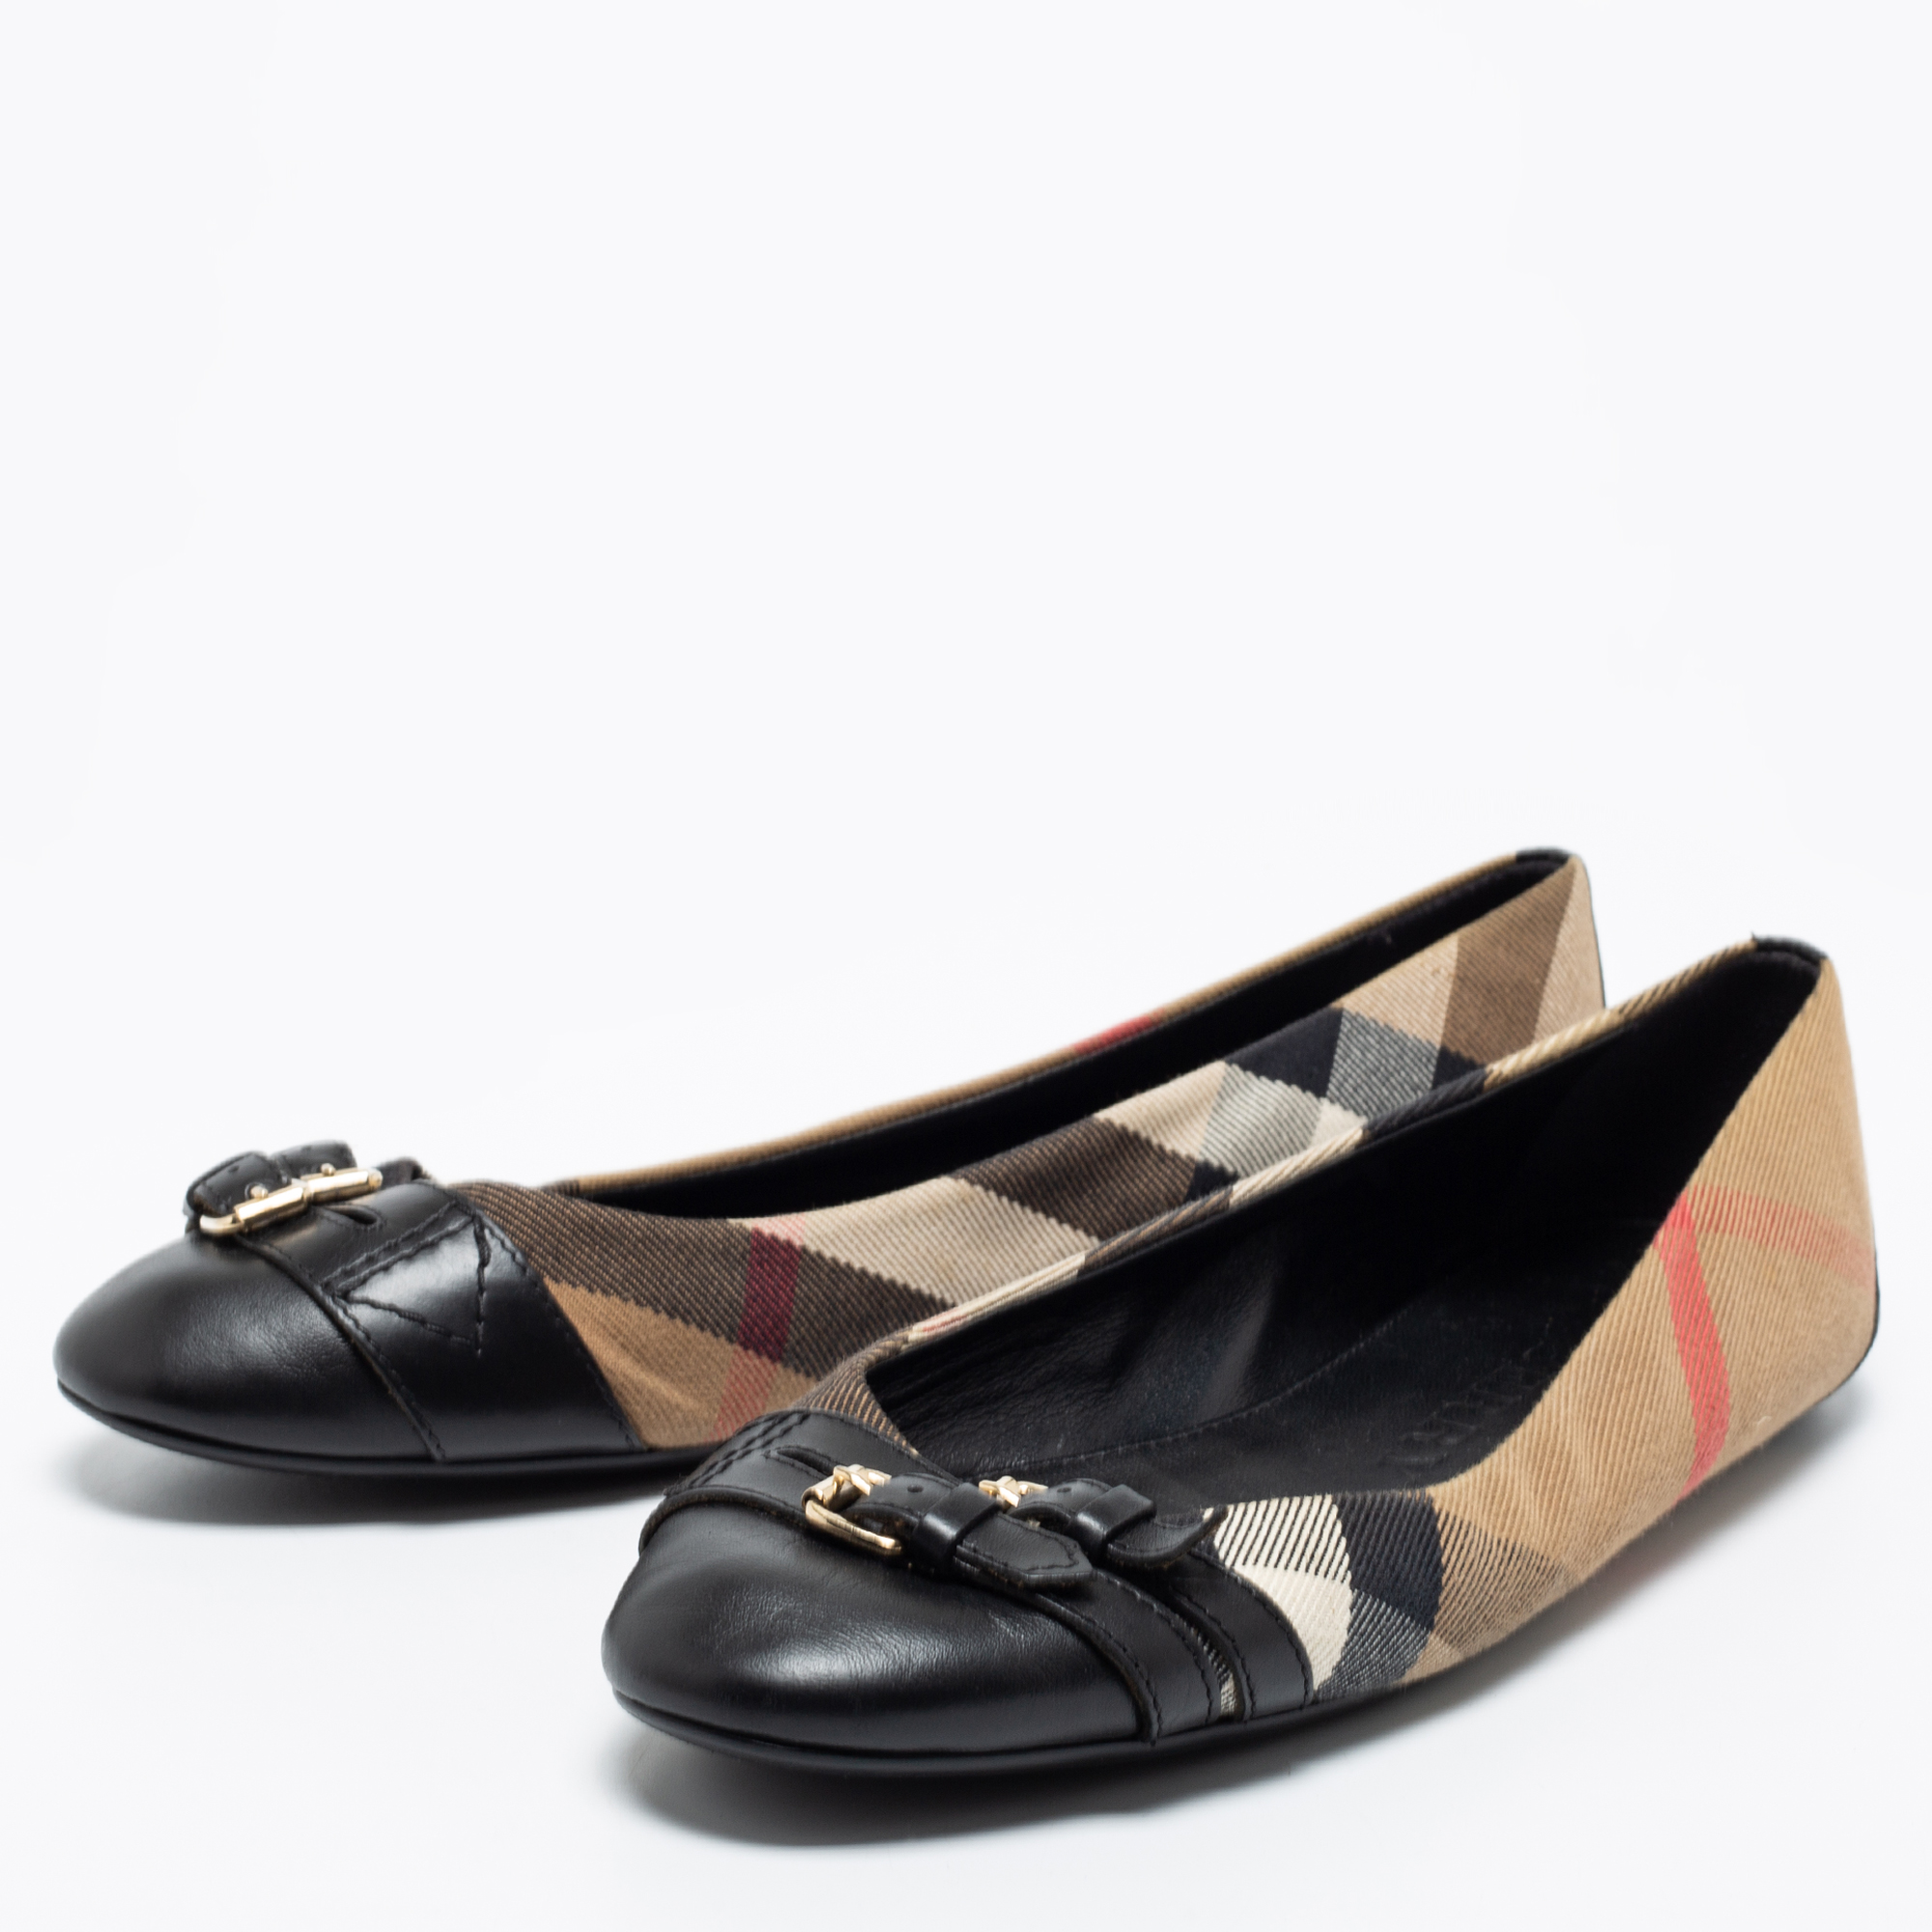 

Burberry Black/Beige Leather And Nova Check Canvas Buckle Detail Ballet Flats Size